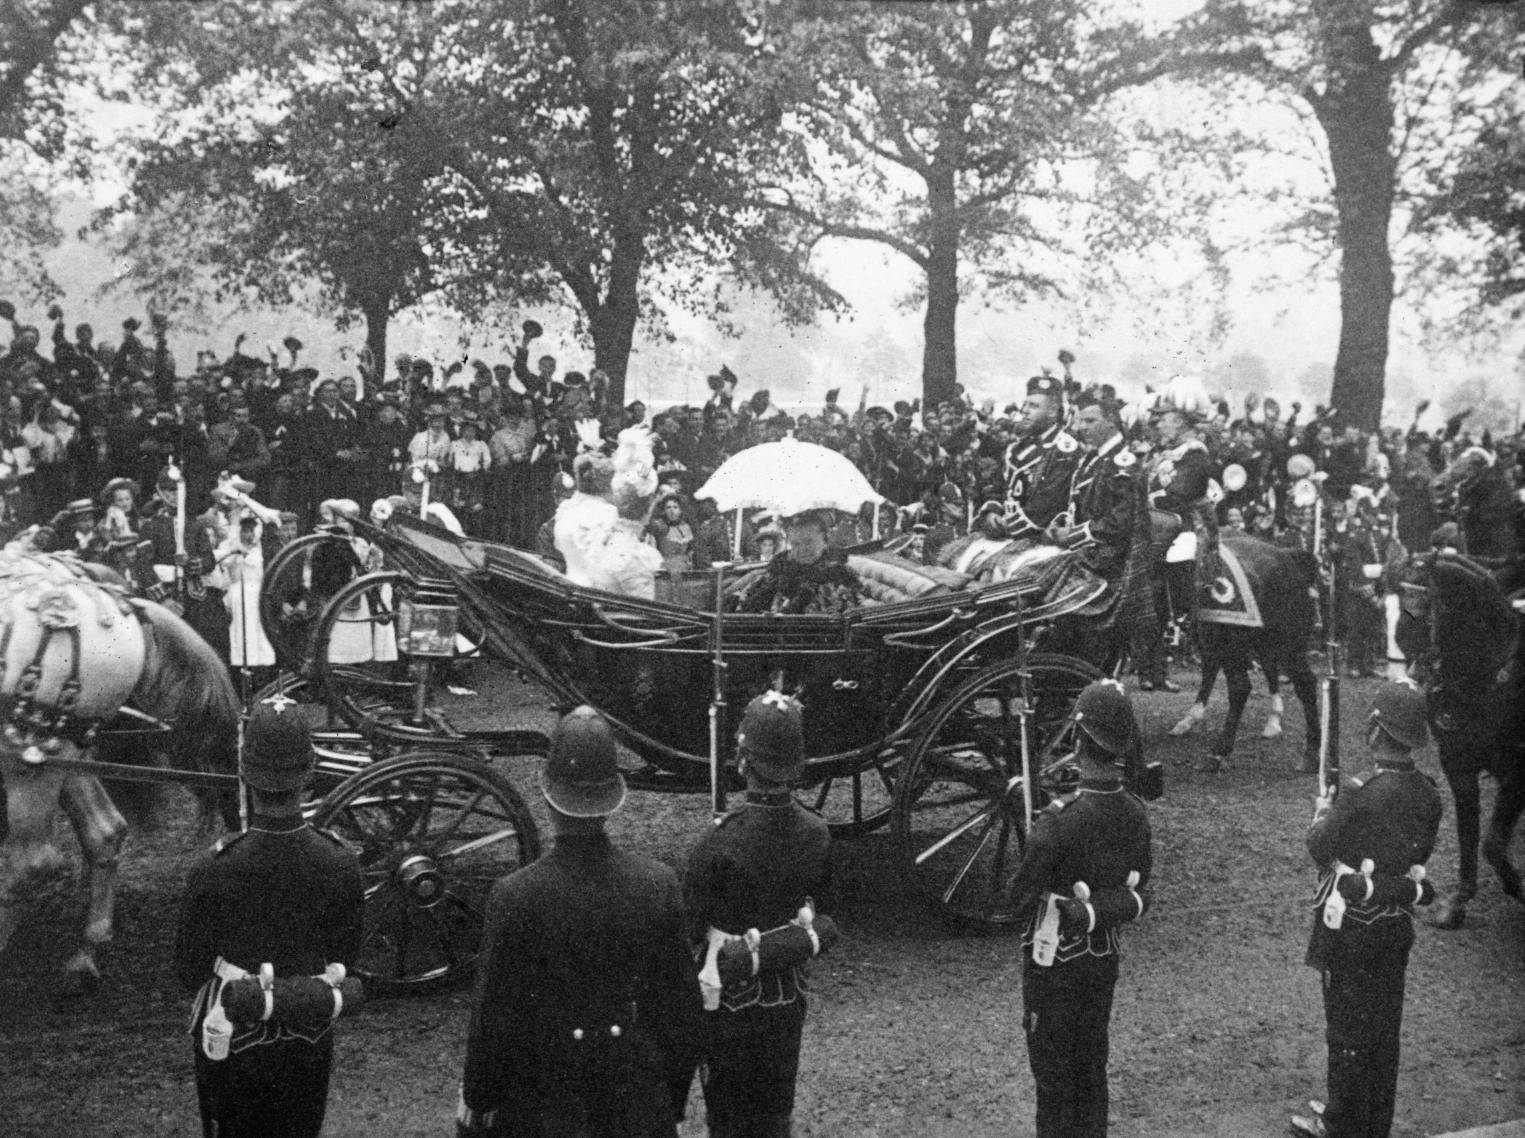 Queen Victoria in her carriage during the Jubilee parade